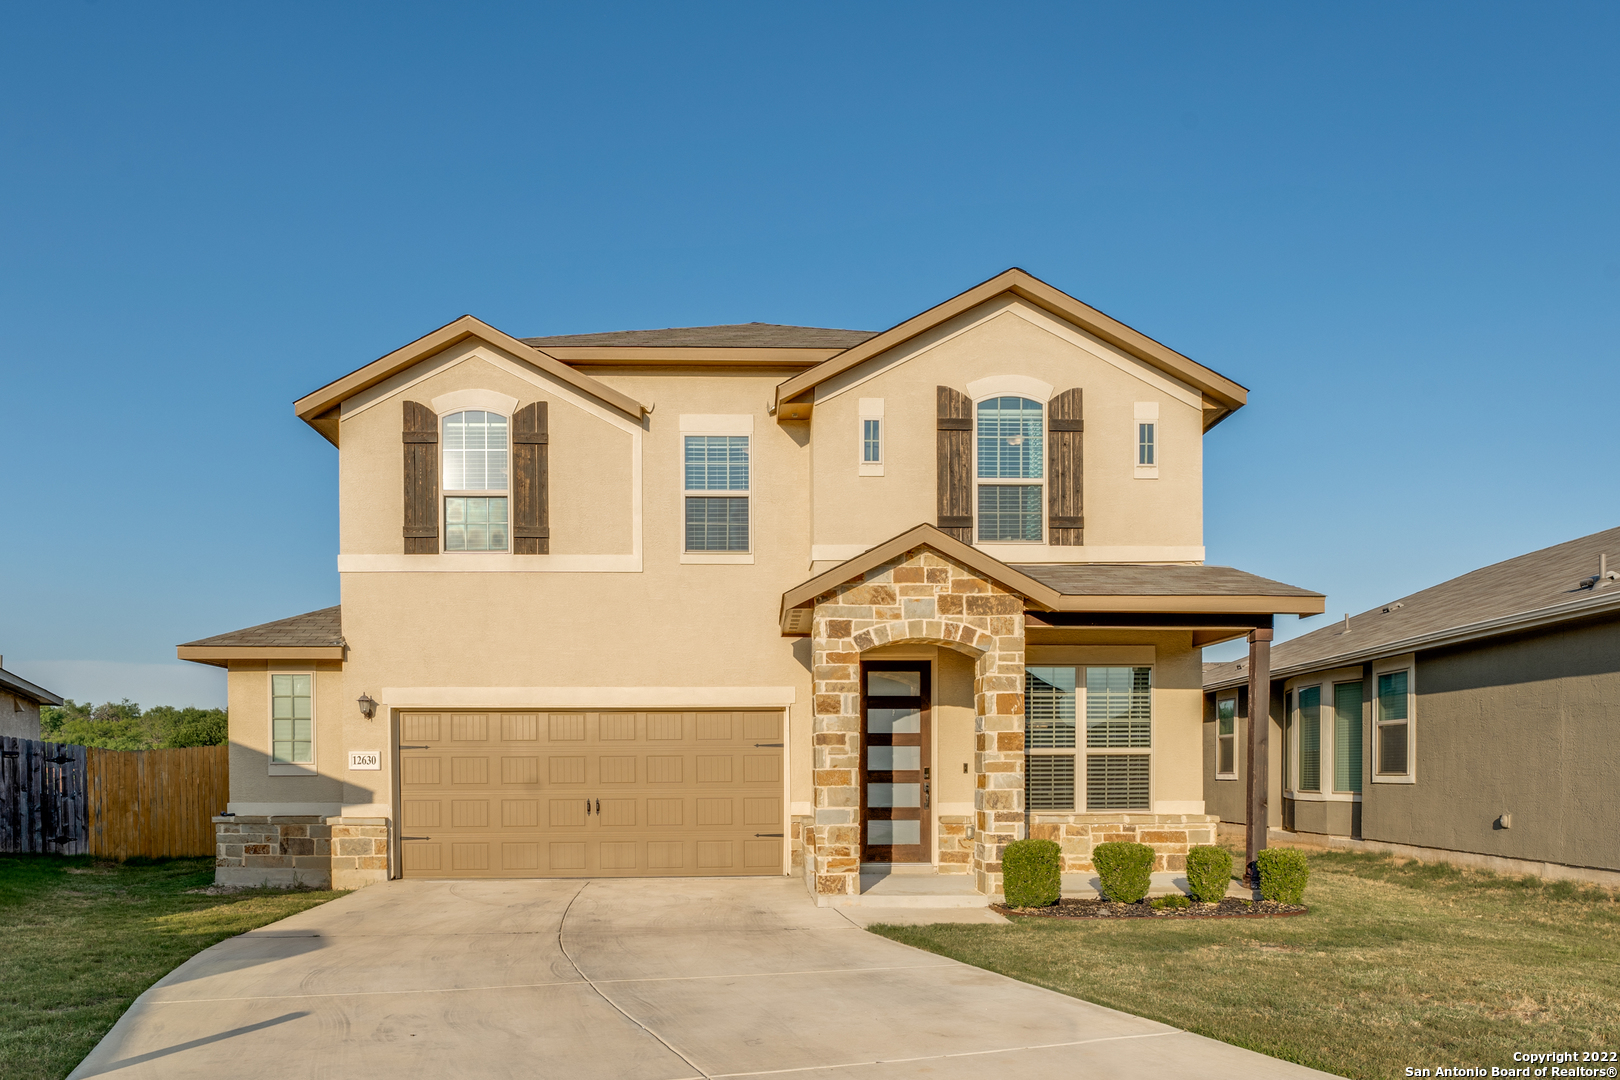 Welcome to this absolutely stunning and well-maintained home located in the Steubing Farm subdivision. This home was built in 2017 at just over 2650 square feet and you're right by UTSA, the Rim, La Cantera, close to medical, and central to almost anything else you need. There is true pride in ownership in this home and almost everything in this home has been upgraded from the flooring to the beautiful antique cream cabinets to the 8 ft front door. Key features are the 4 spacious bedrooms and 3 1/2 bathrooms. You can truly enjoy your large, downstairs master suite with it's great closet space and luxurious master bathroom with separate tub/shower and double vanity. The secondary bedroom sizes are perfect, as well, and all are located upstairs along with one of the largest game room/loft areas you can get anywhere! The kitchen is truly a gem and the breakfast nook rounds out this wonderful, open floor plan. This home has a separate dining area when you enter the home and a truly unique office/study nook. It has a great, huge fenced-in backyard with greenbelt views and a covered patio that is ready for your next cookout with friends or family. This home is a must see, so add it to your list and see it before it's gone!